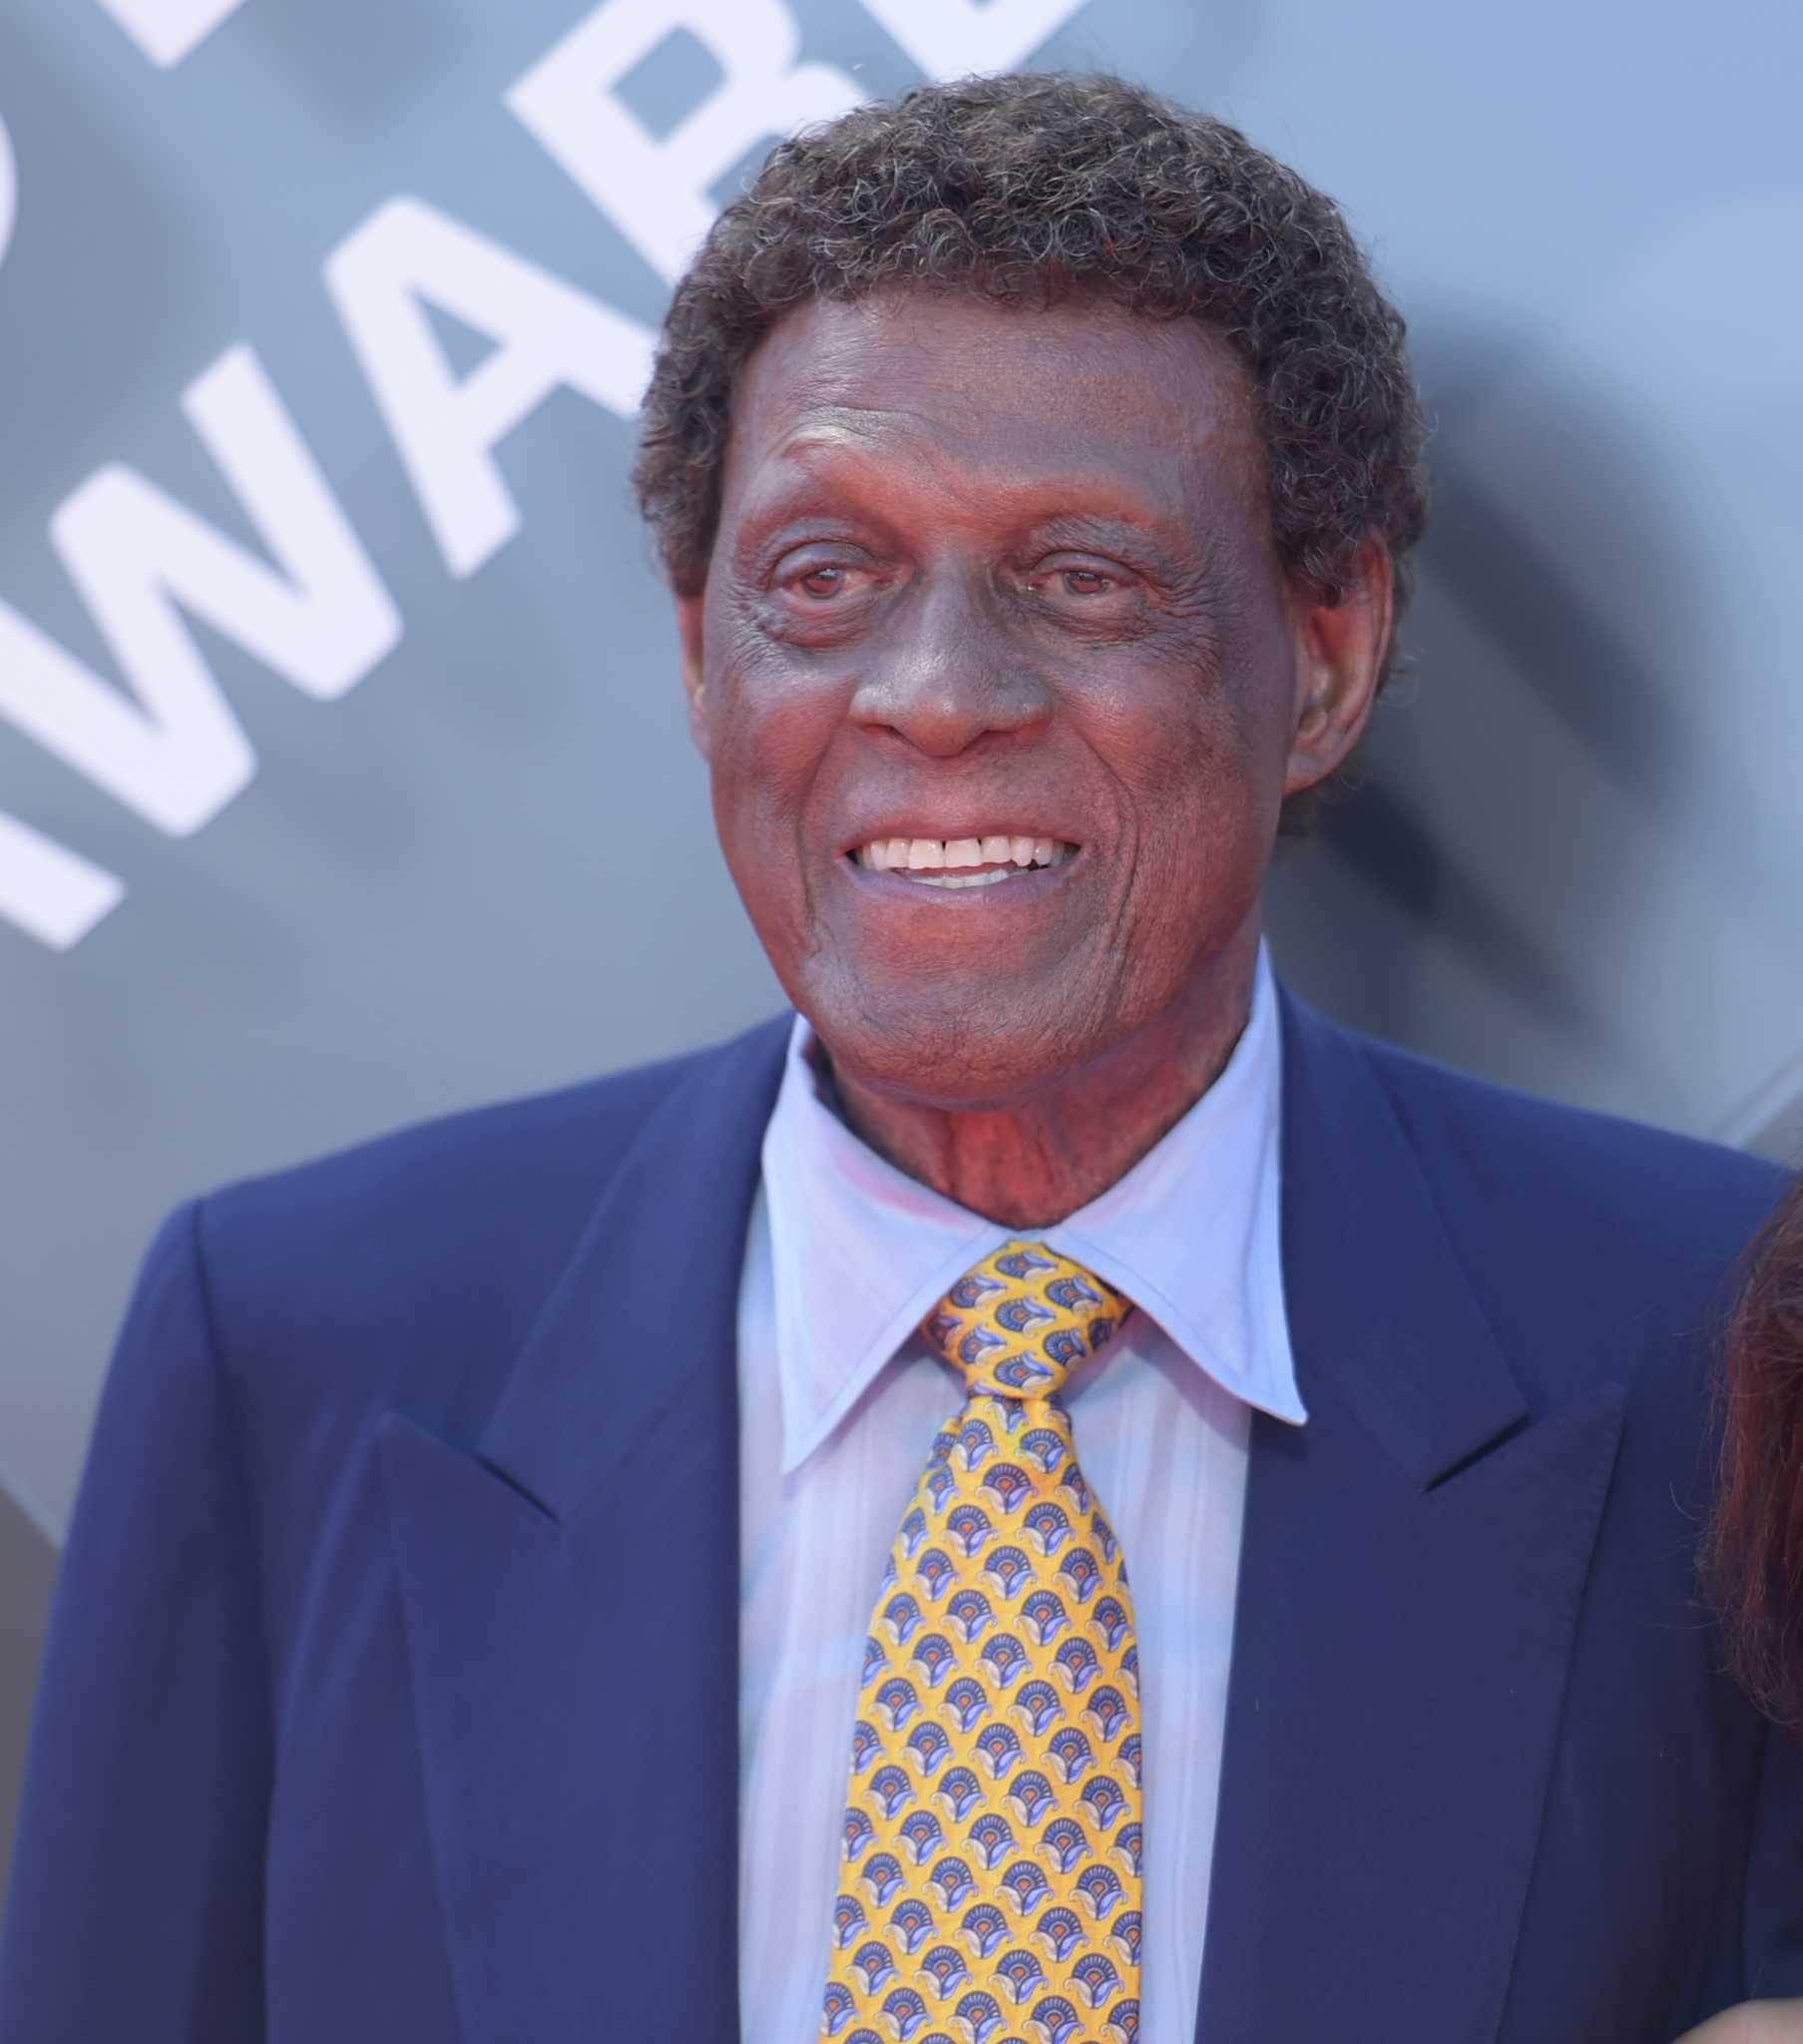 Elgin Baylor, former Lakers Hall of Famer and 11-time NBA All-Star, dies at  86